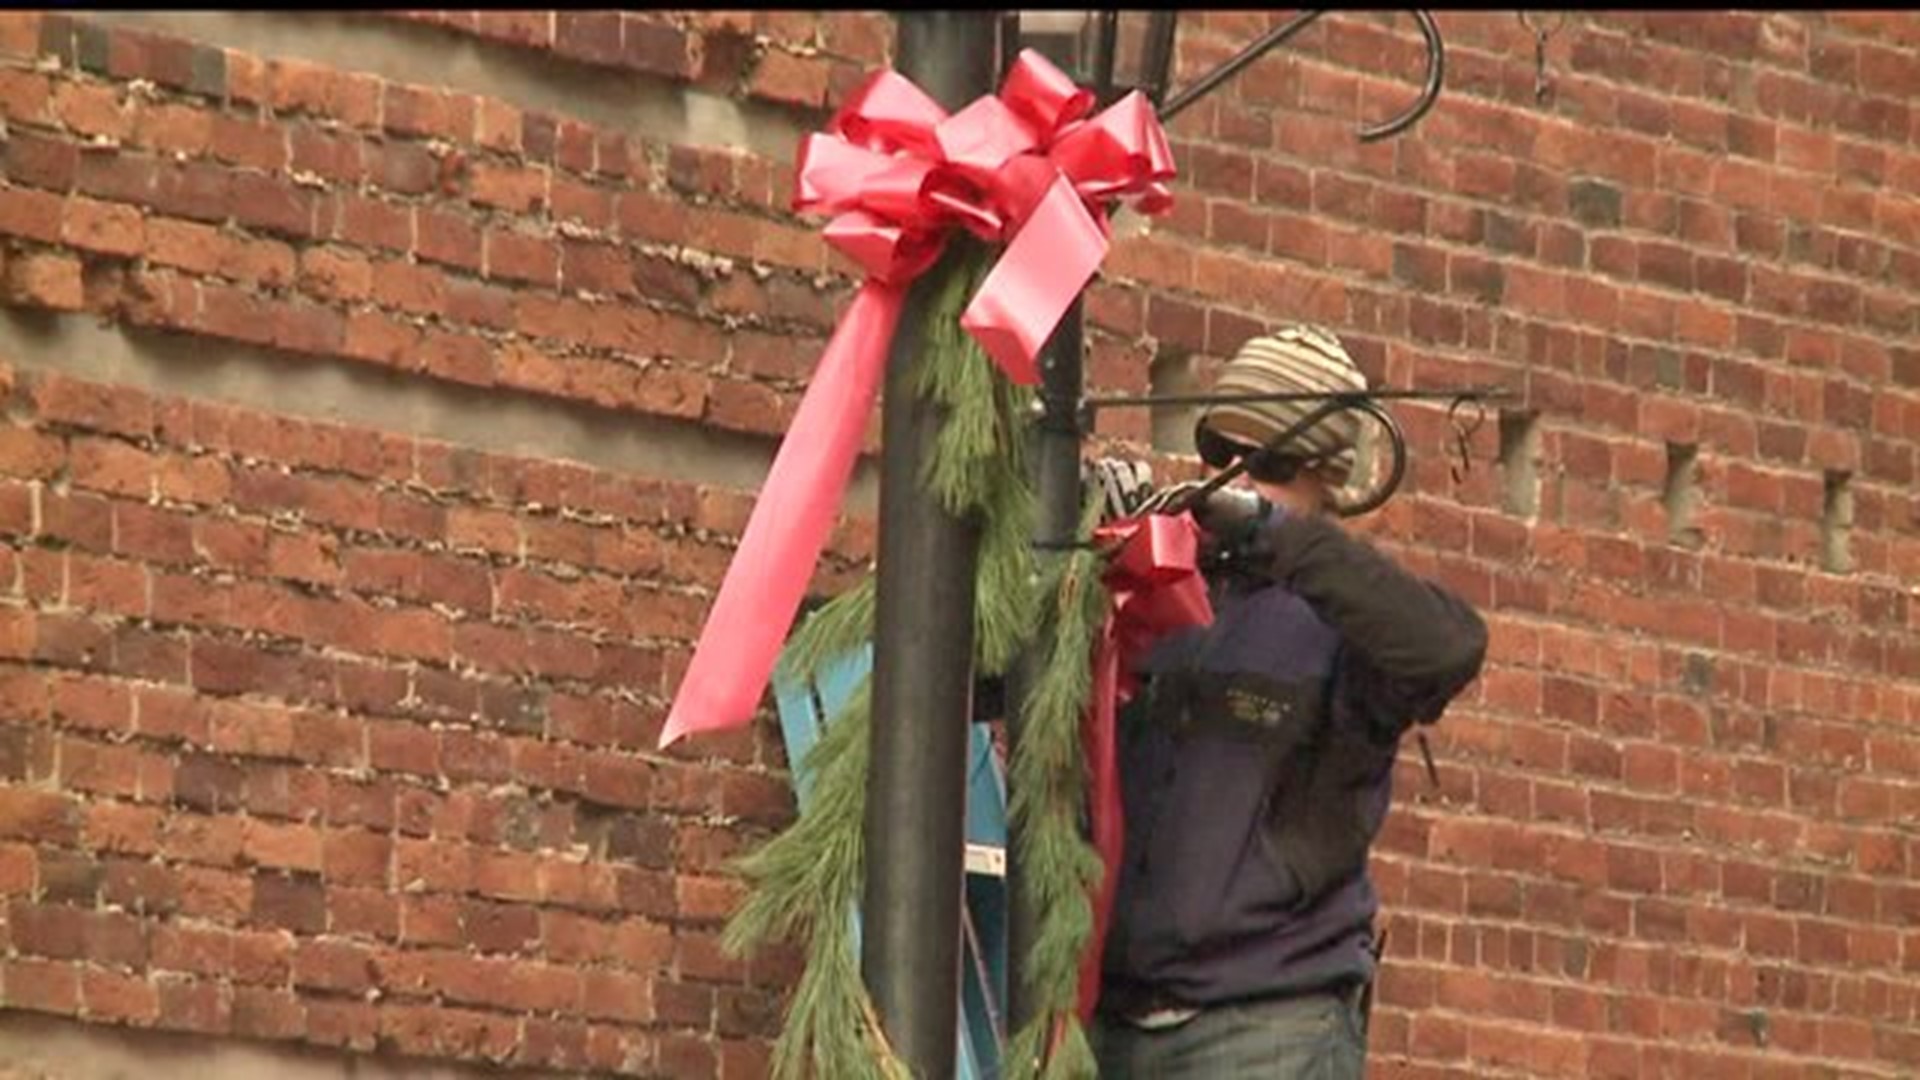 York gets decorated for Christmas